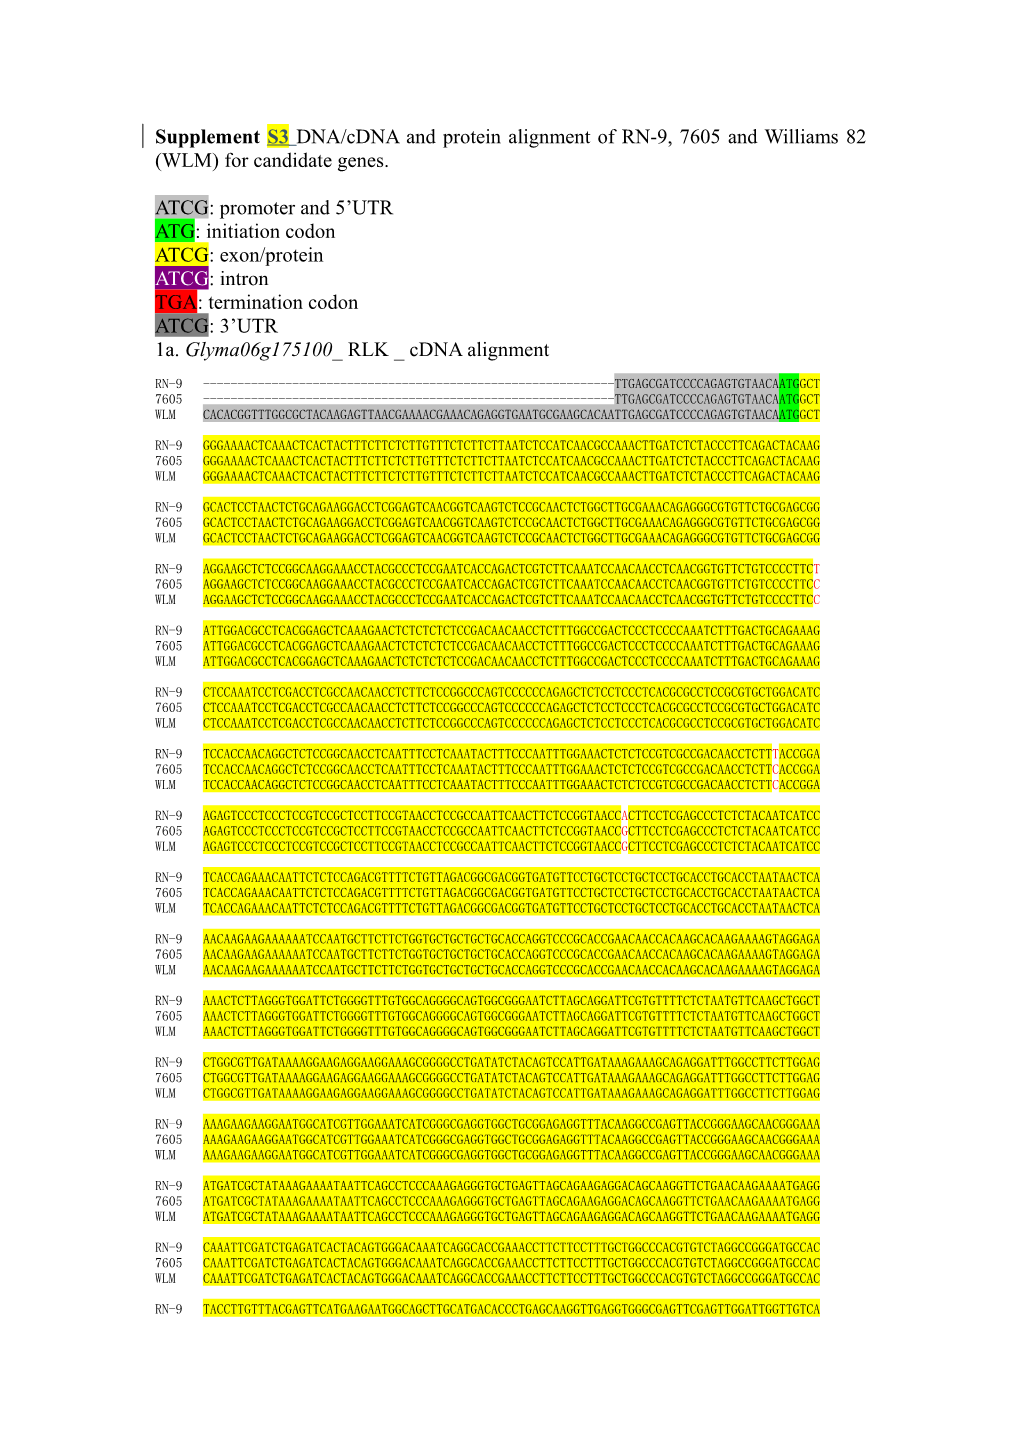 Supplement S3 DNA/Cdna and Protein Alignment of RN-9,7605And Williams 82 (WLM) Forcandidate